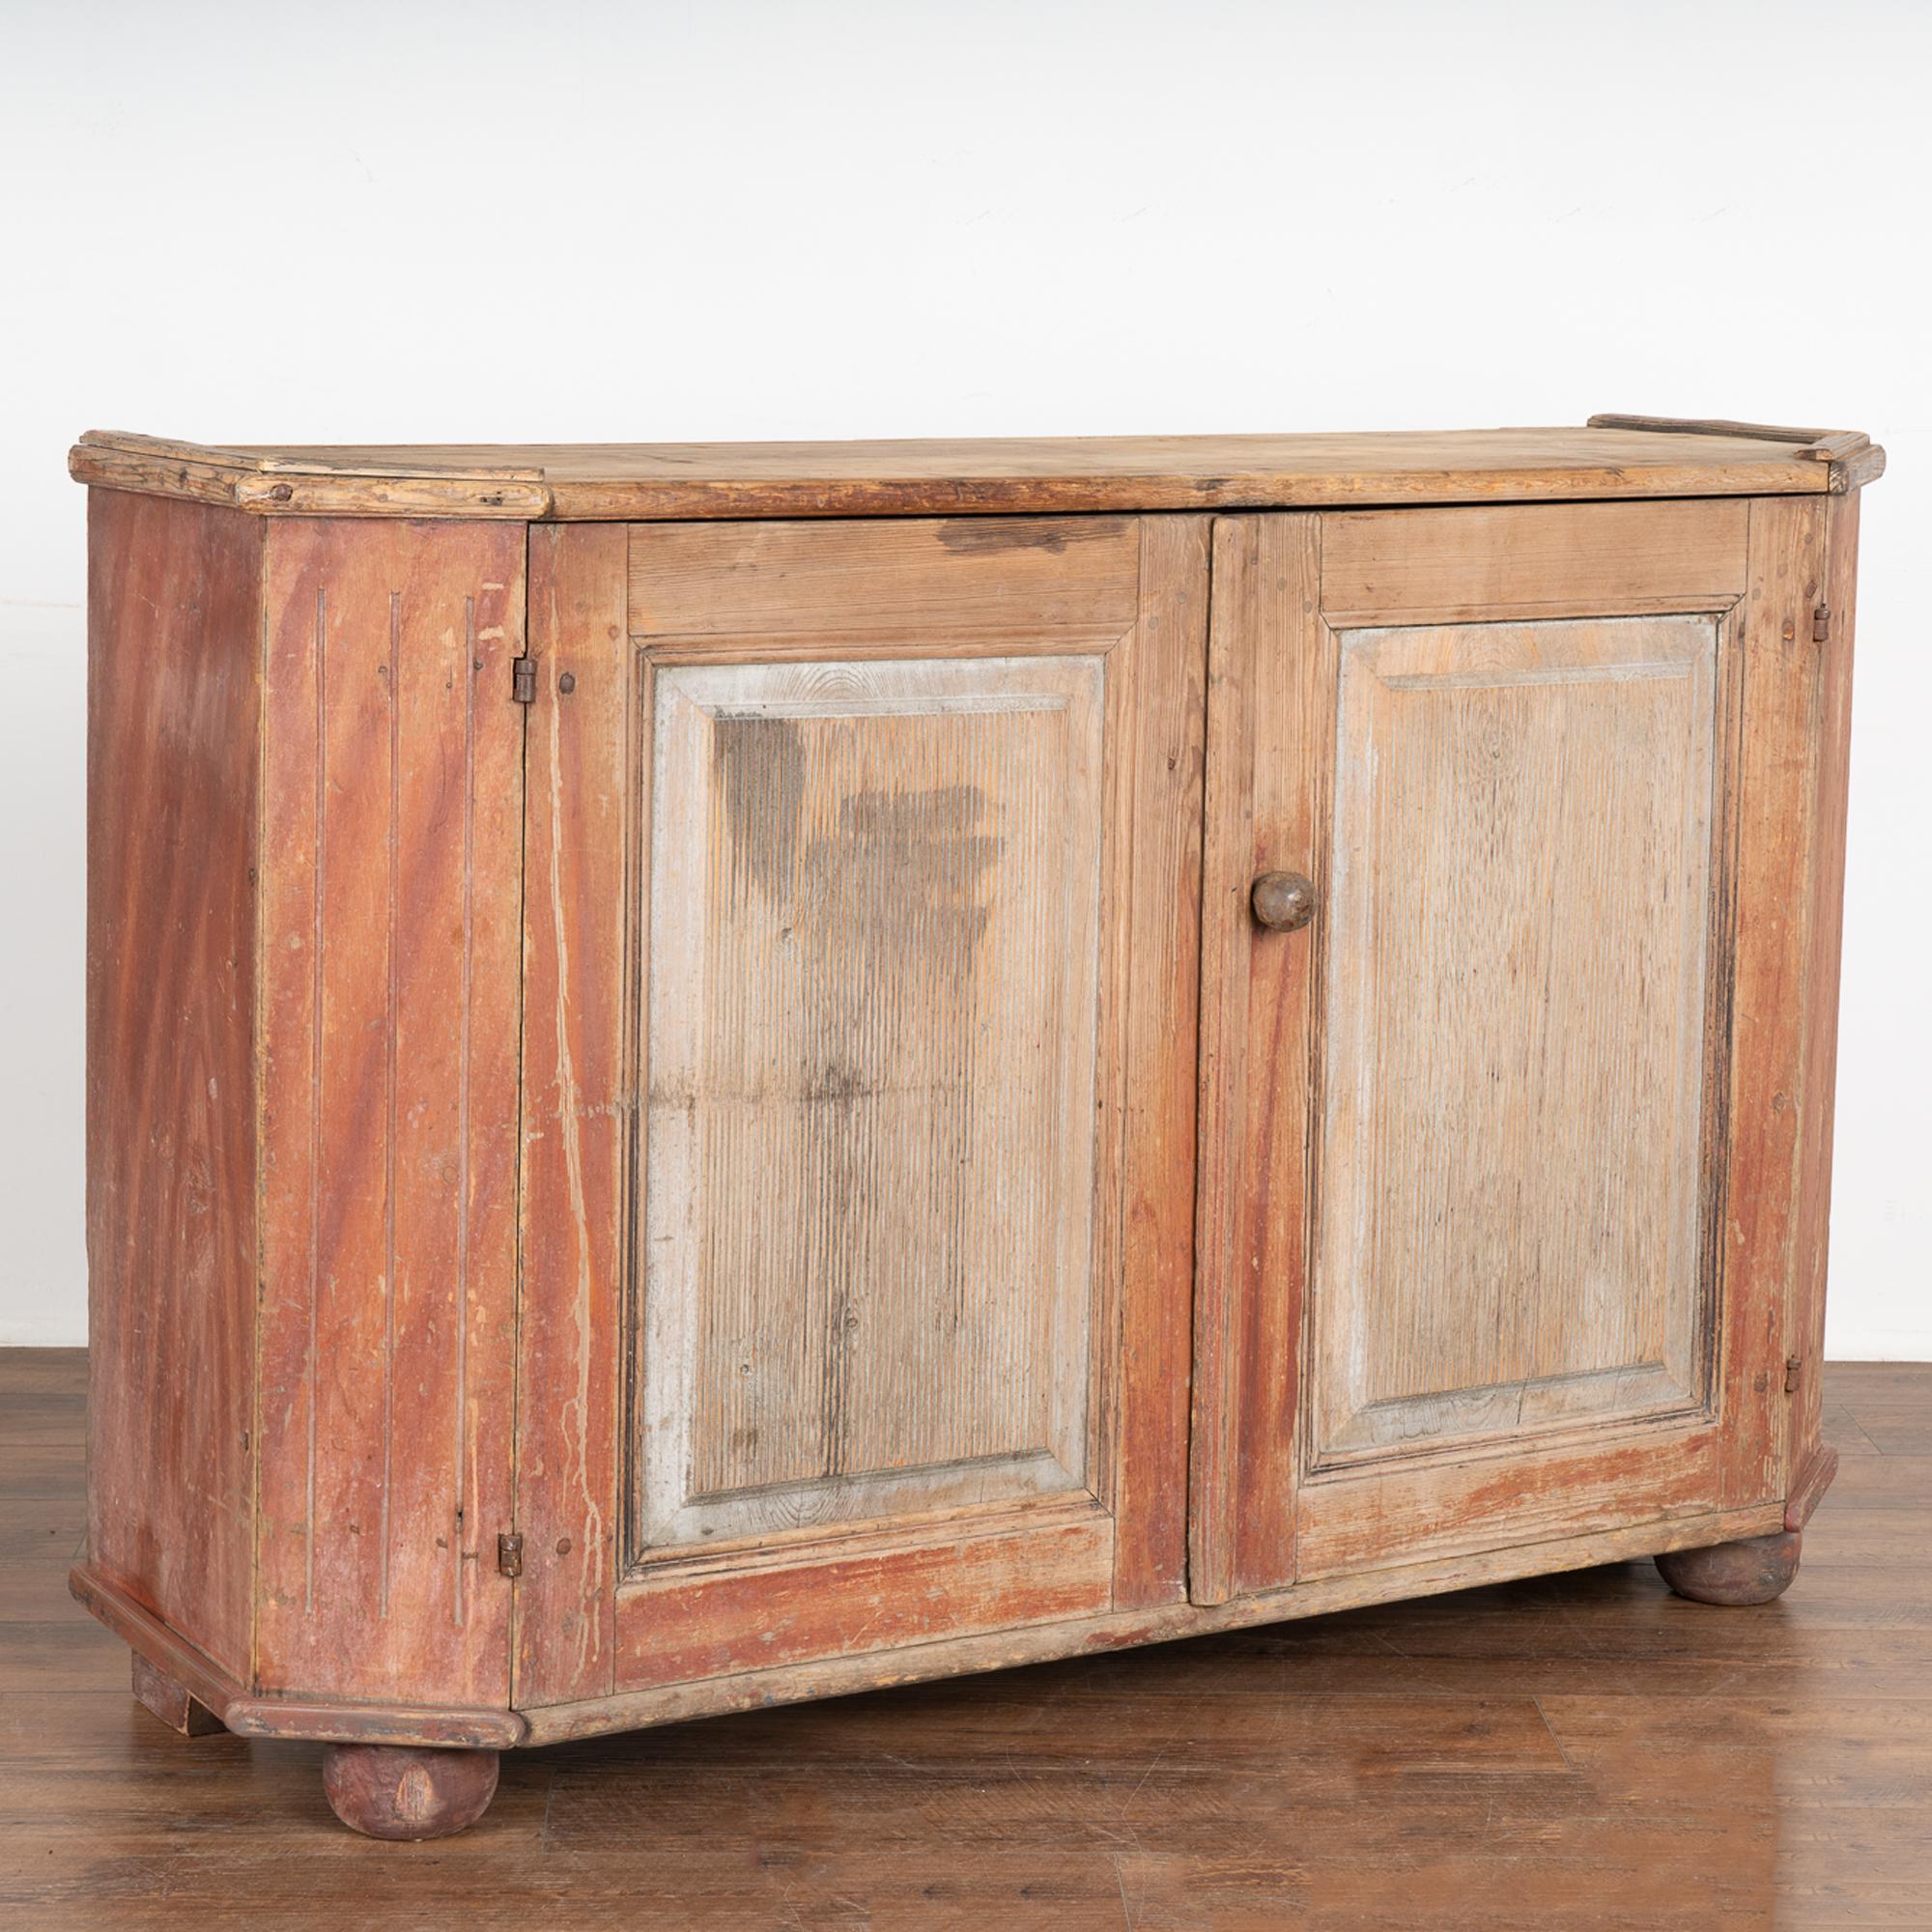 The attractive soft color pallet of this large pine Swedish sideboard comes from the original hand-painted red and white finish which has been gently scraped and softly distressed through generations of use, resulting in the warm aged patina now